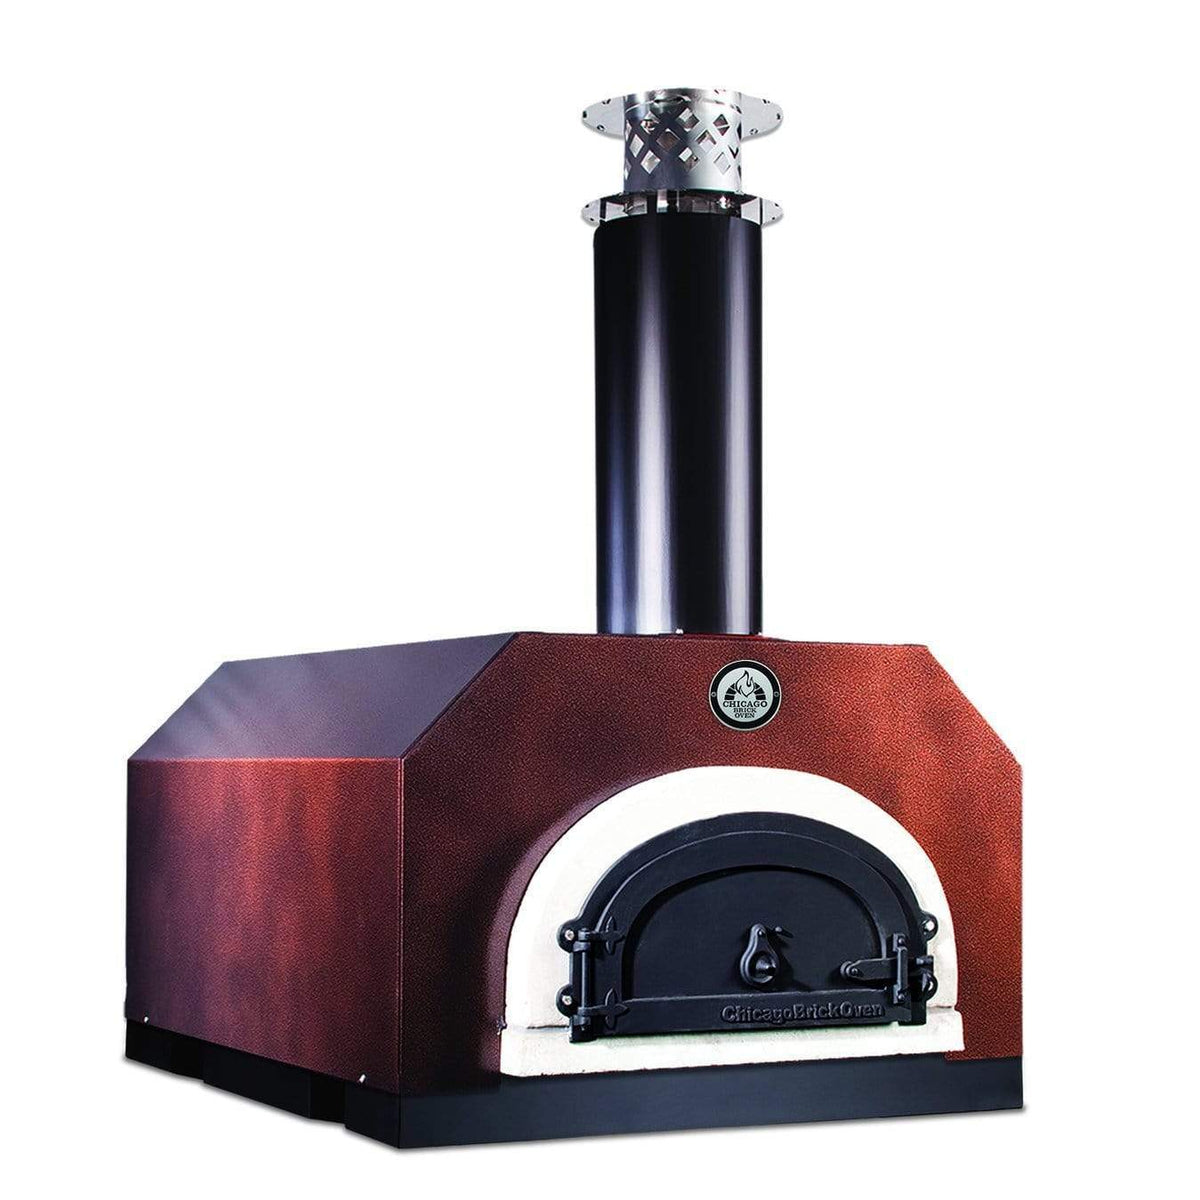 Chicago Brick Oven Pizza Ovens Chicago Brick Oven Wood Fired Pizza Oven / CBO-750 Countertop / 38&quot; X 28&quot; Cooking Surface / CBO-O-CT-750